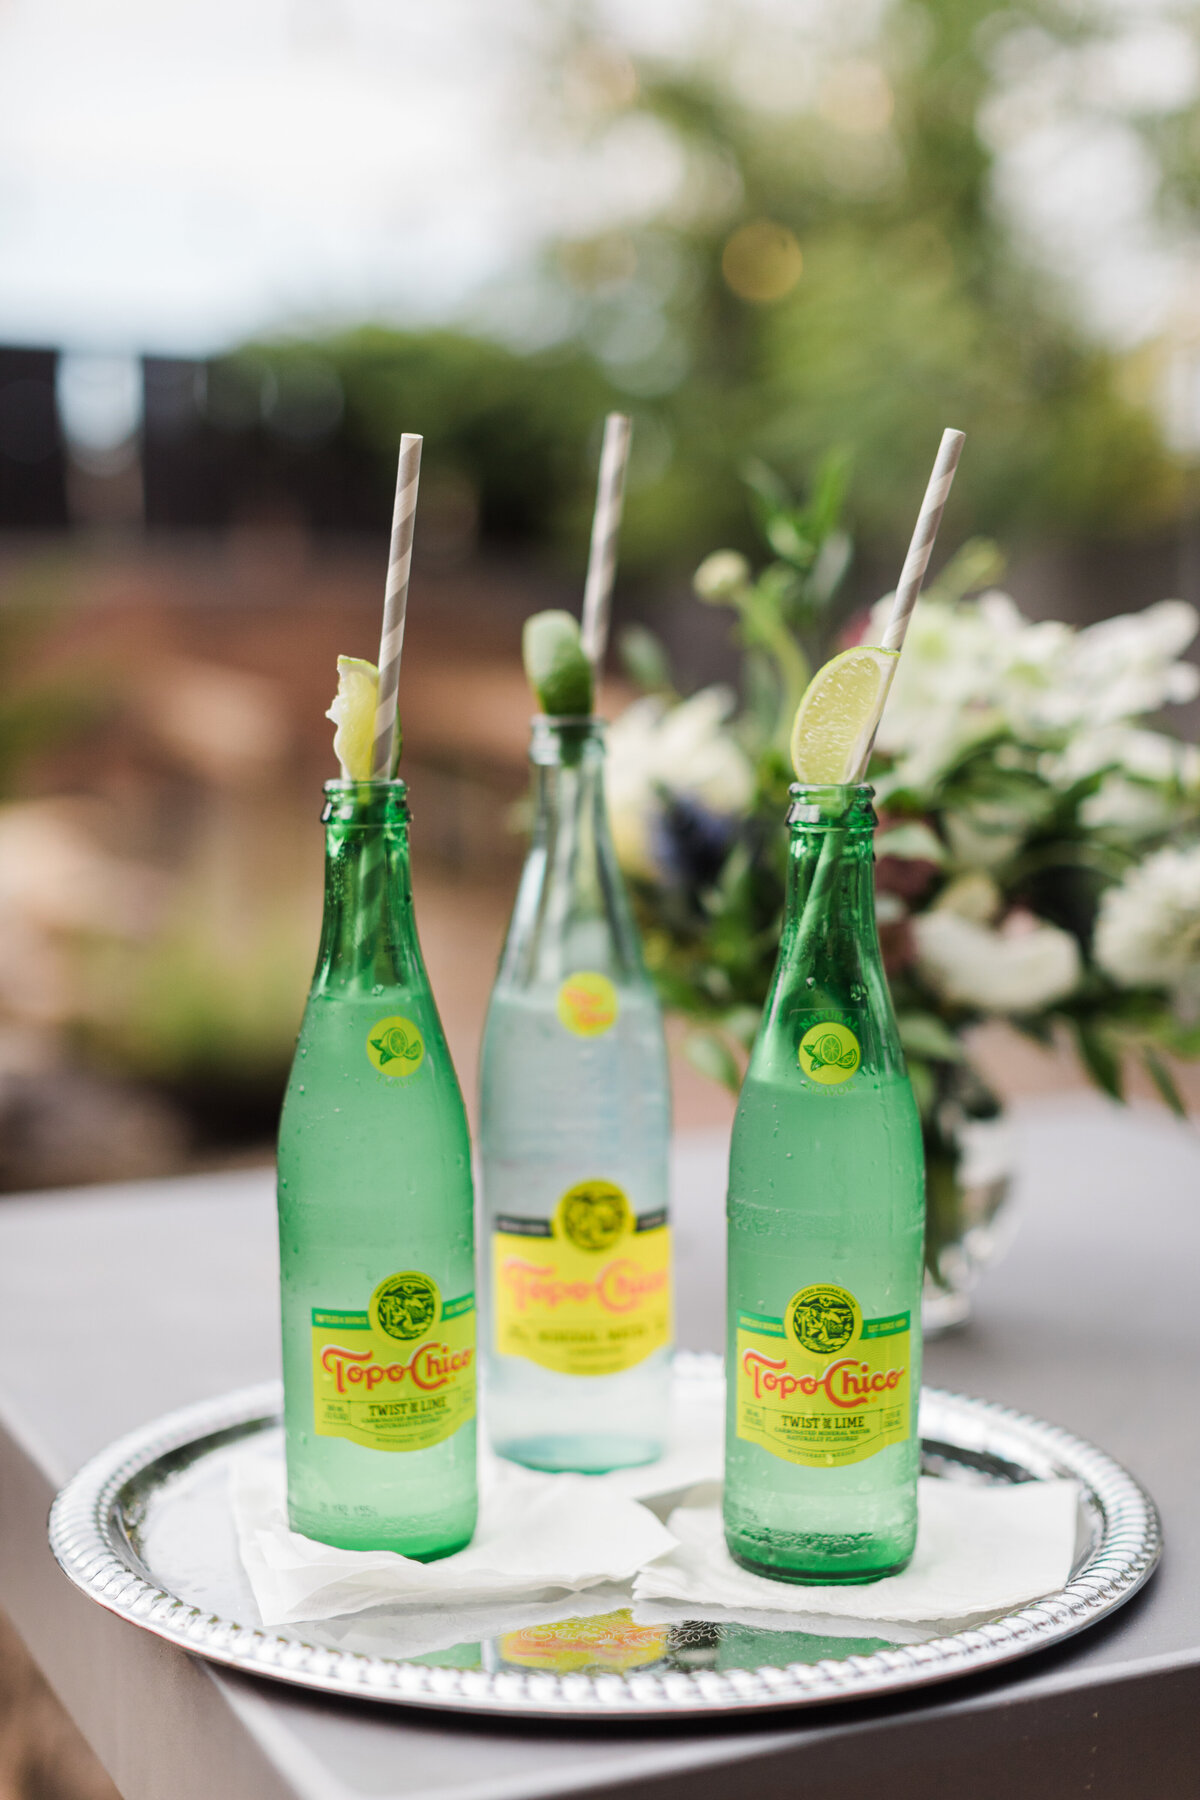 Detail photo of three bottles of Topo Chico on a silver platter during a wedding reception at Artspace111 in Fort Worth, Texas. Each bottle is resting on a napkin and has a lime wedge and straw coming out the top. A bouquet of flowers can be seen out of focus in the background.